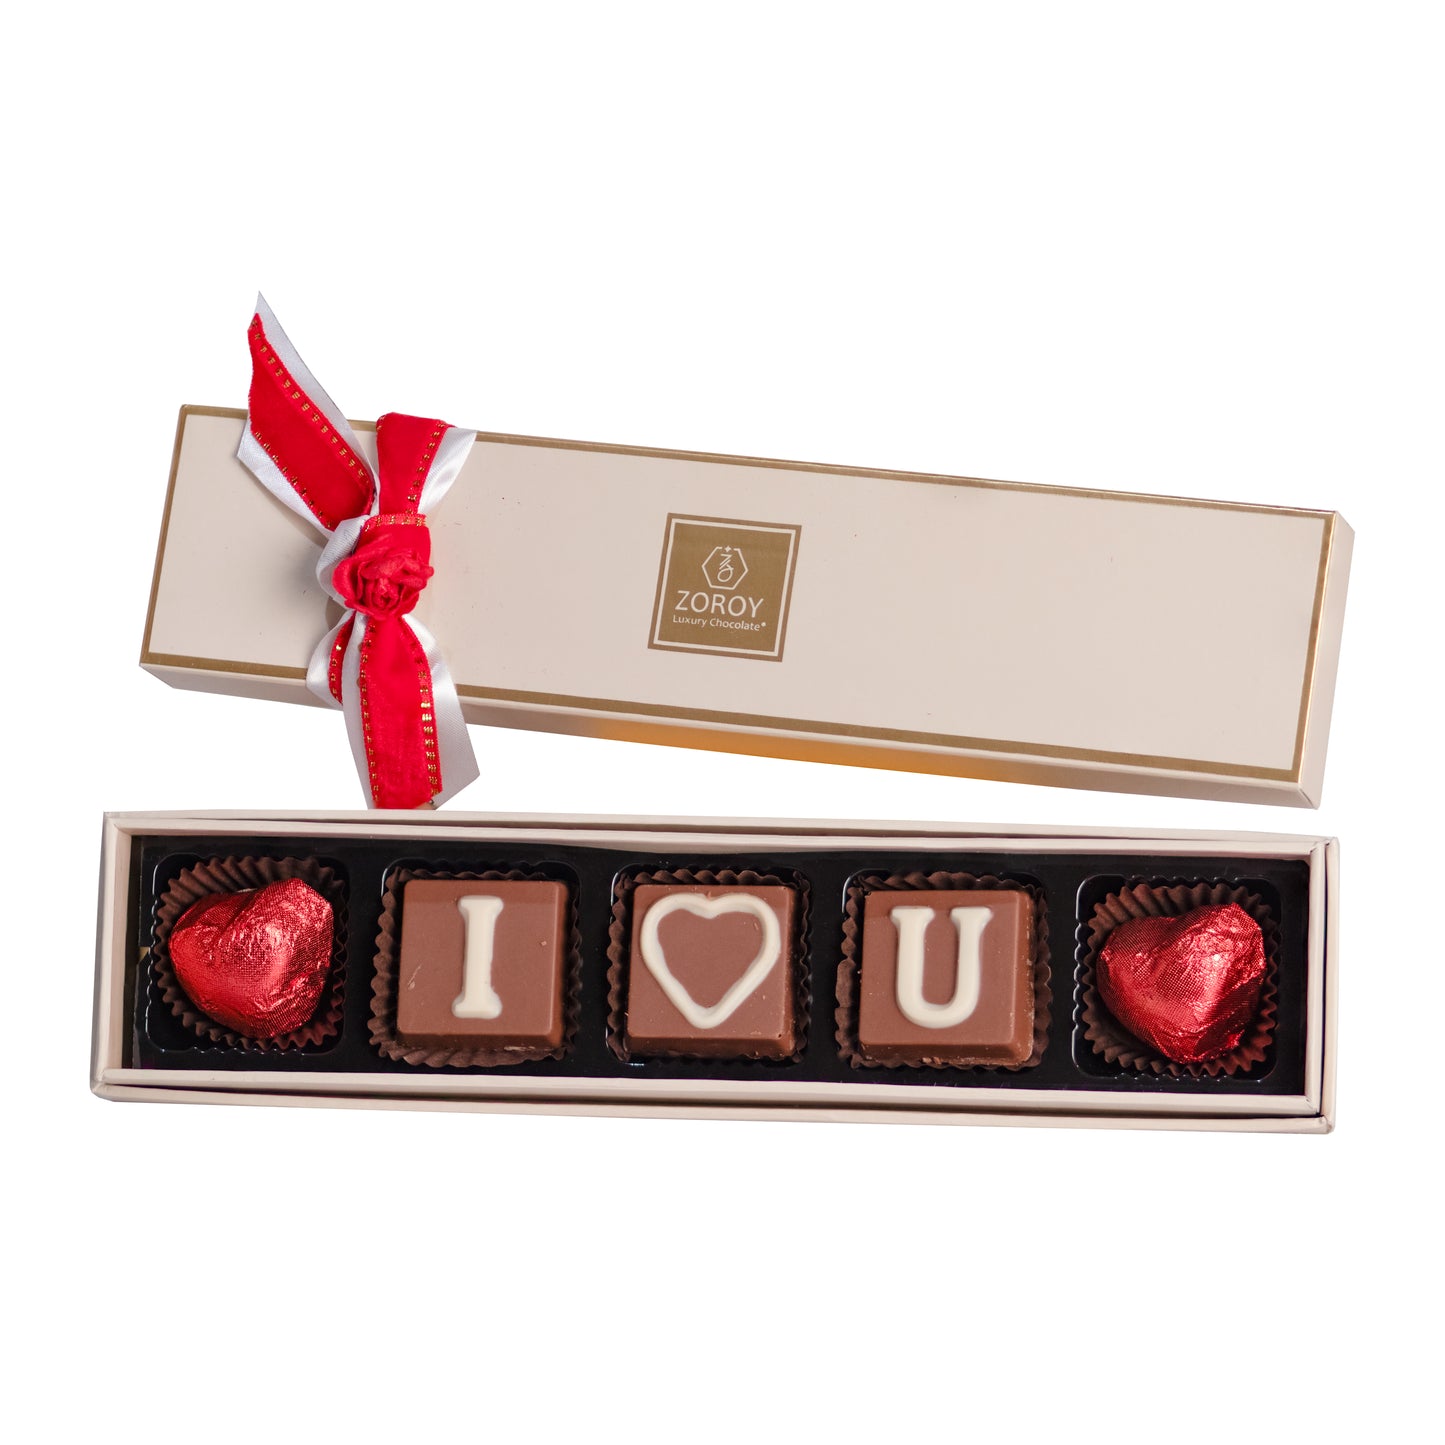 ZOROY LUXURY CHOCOLATE Valentines day Love Gift Magical ILU Box with 5 milk chocolates For Girlfriend | Boyfriend Anniversary Gifts For Wife | Husband | Love Chocolates | Chocolate Hamper For Couples